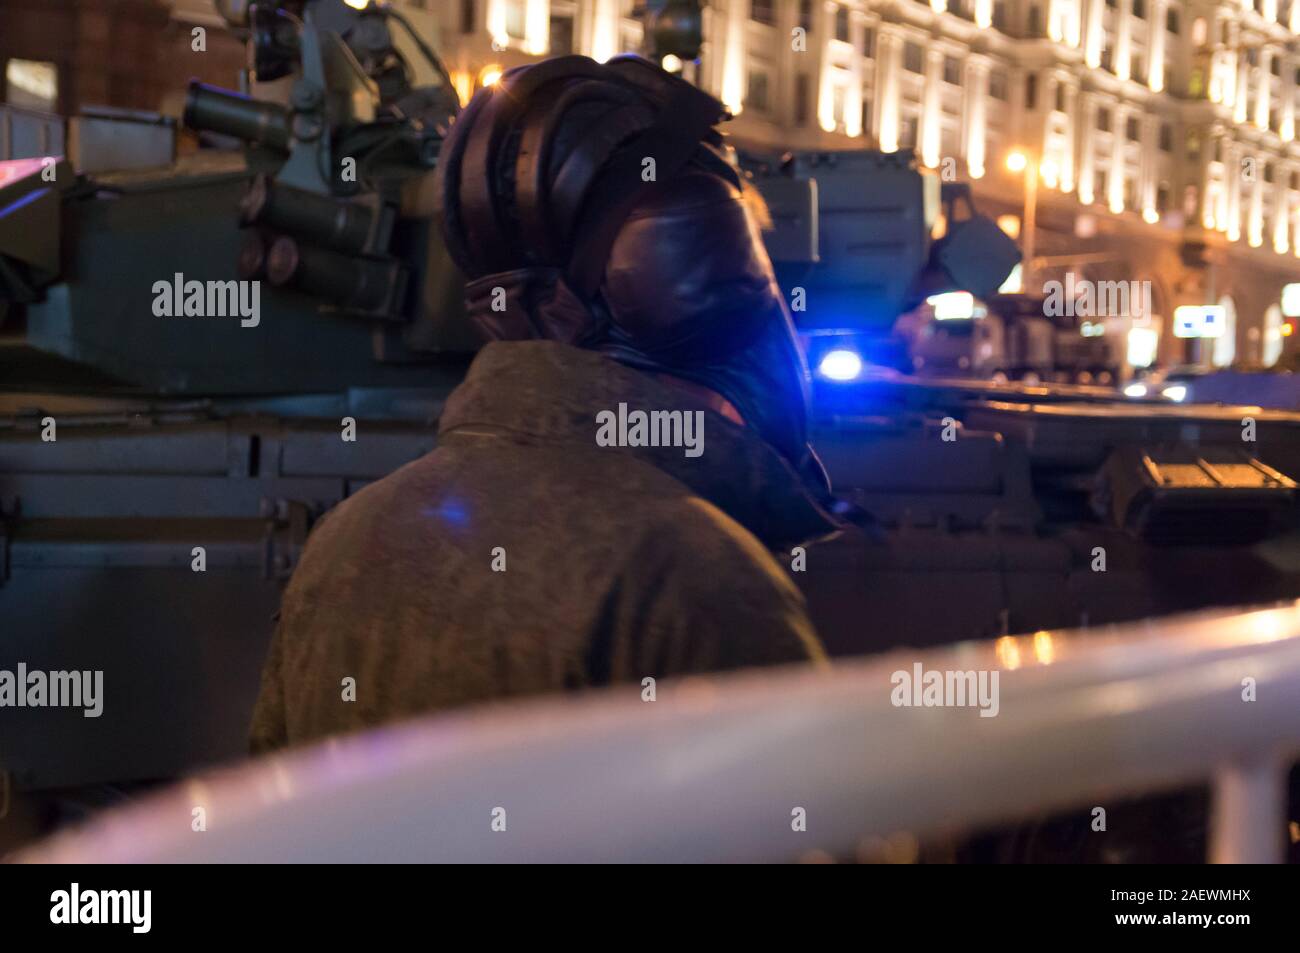 Tank crew, Russian army soldiers, T-90 battle tanks on the streets of night Moscow, Russia Stock Photo